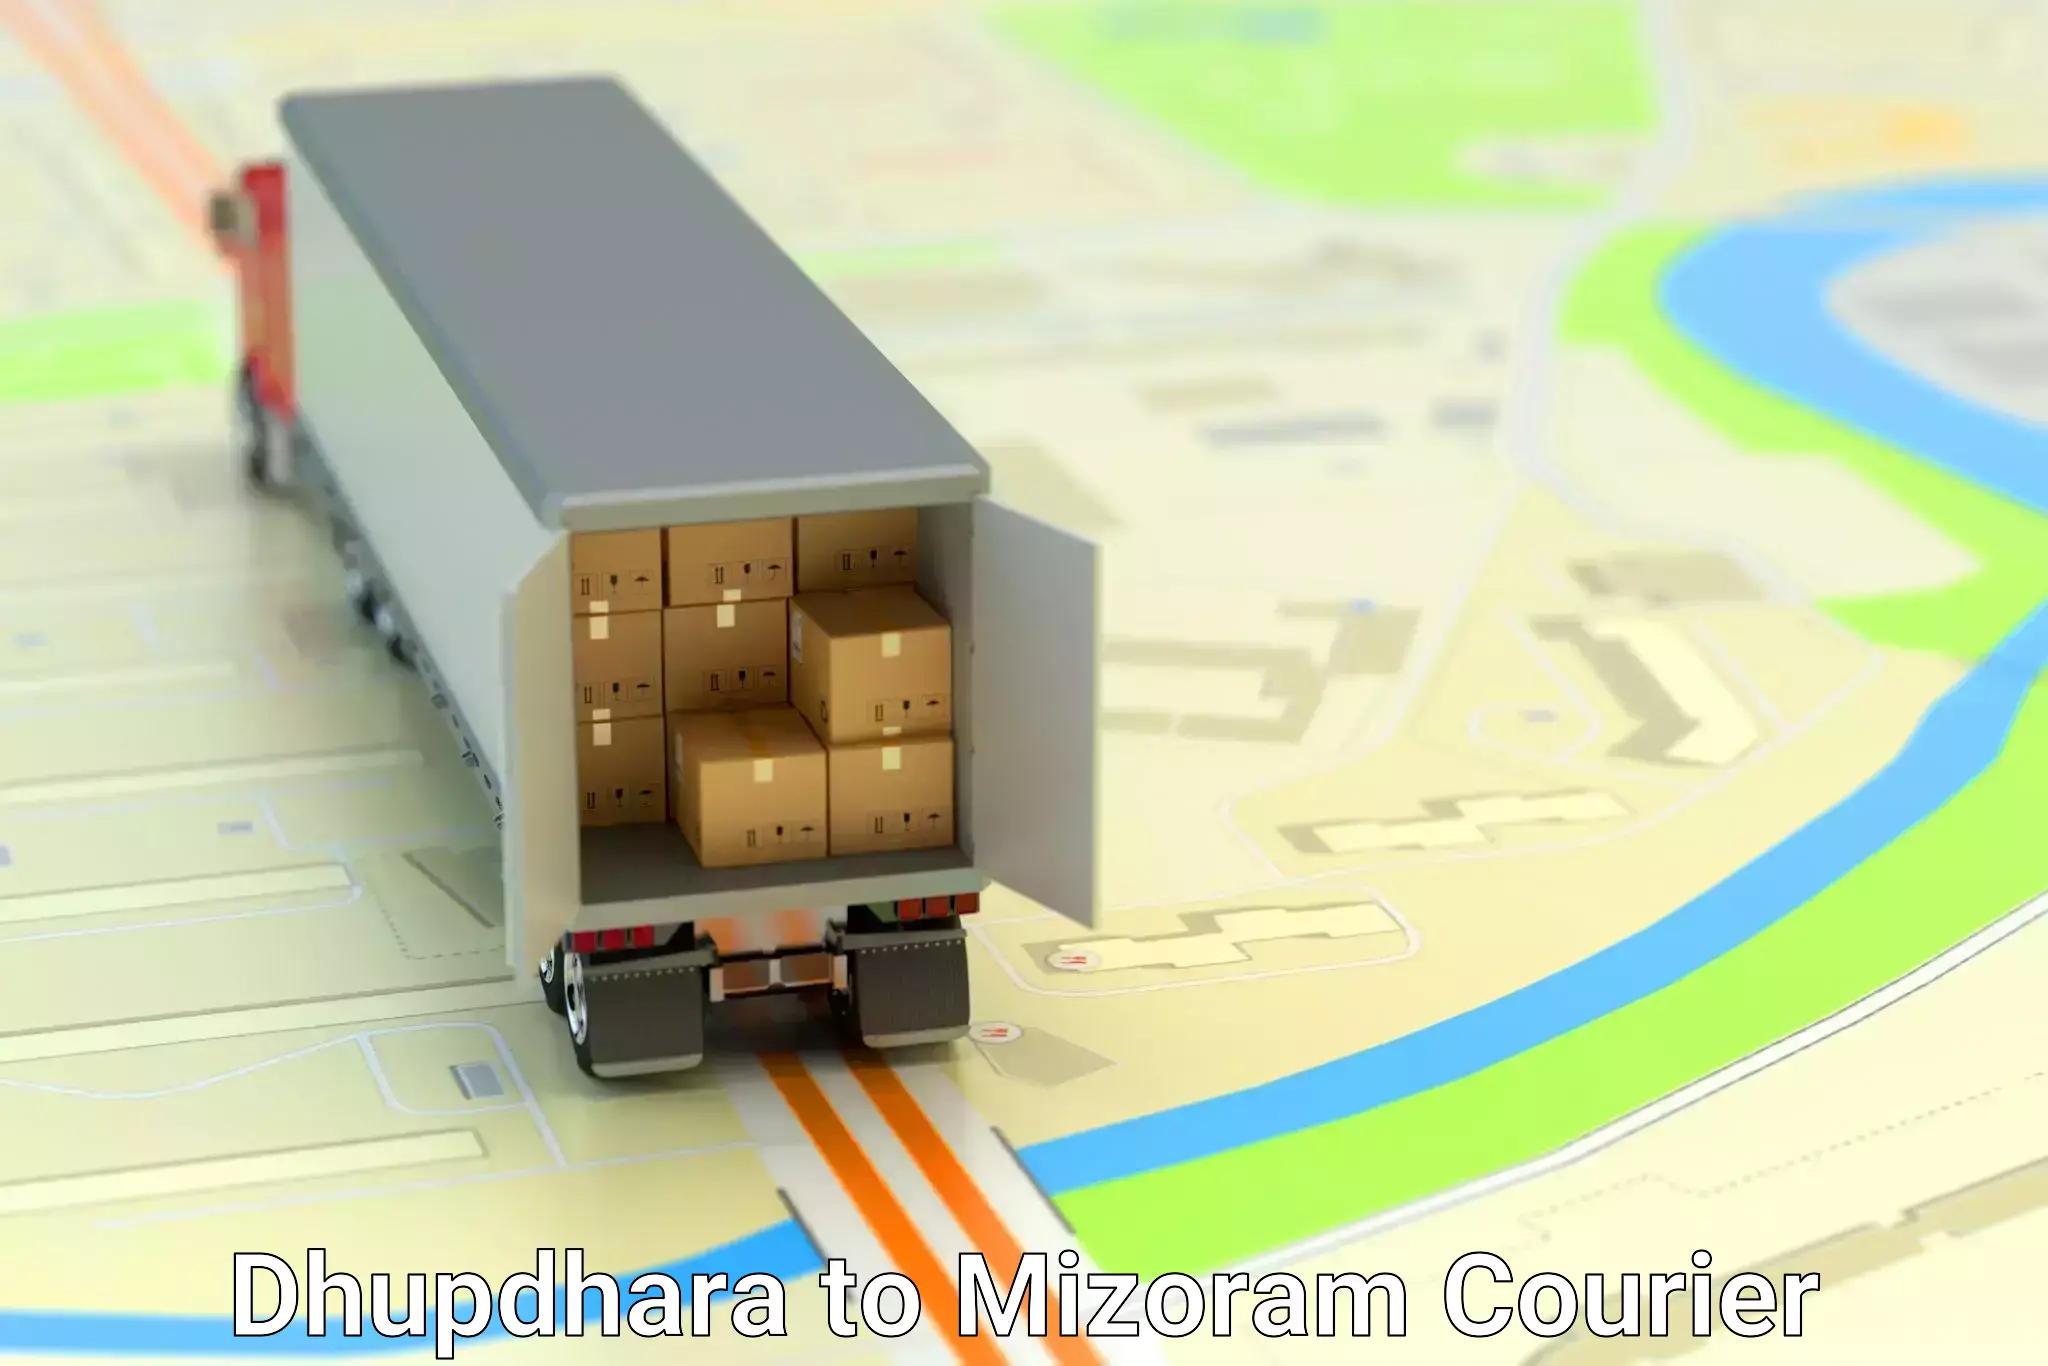 Automated shipping processes in Dhupdhara to Mizoram